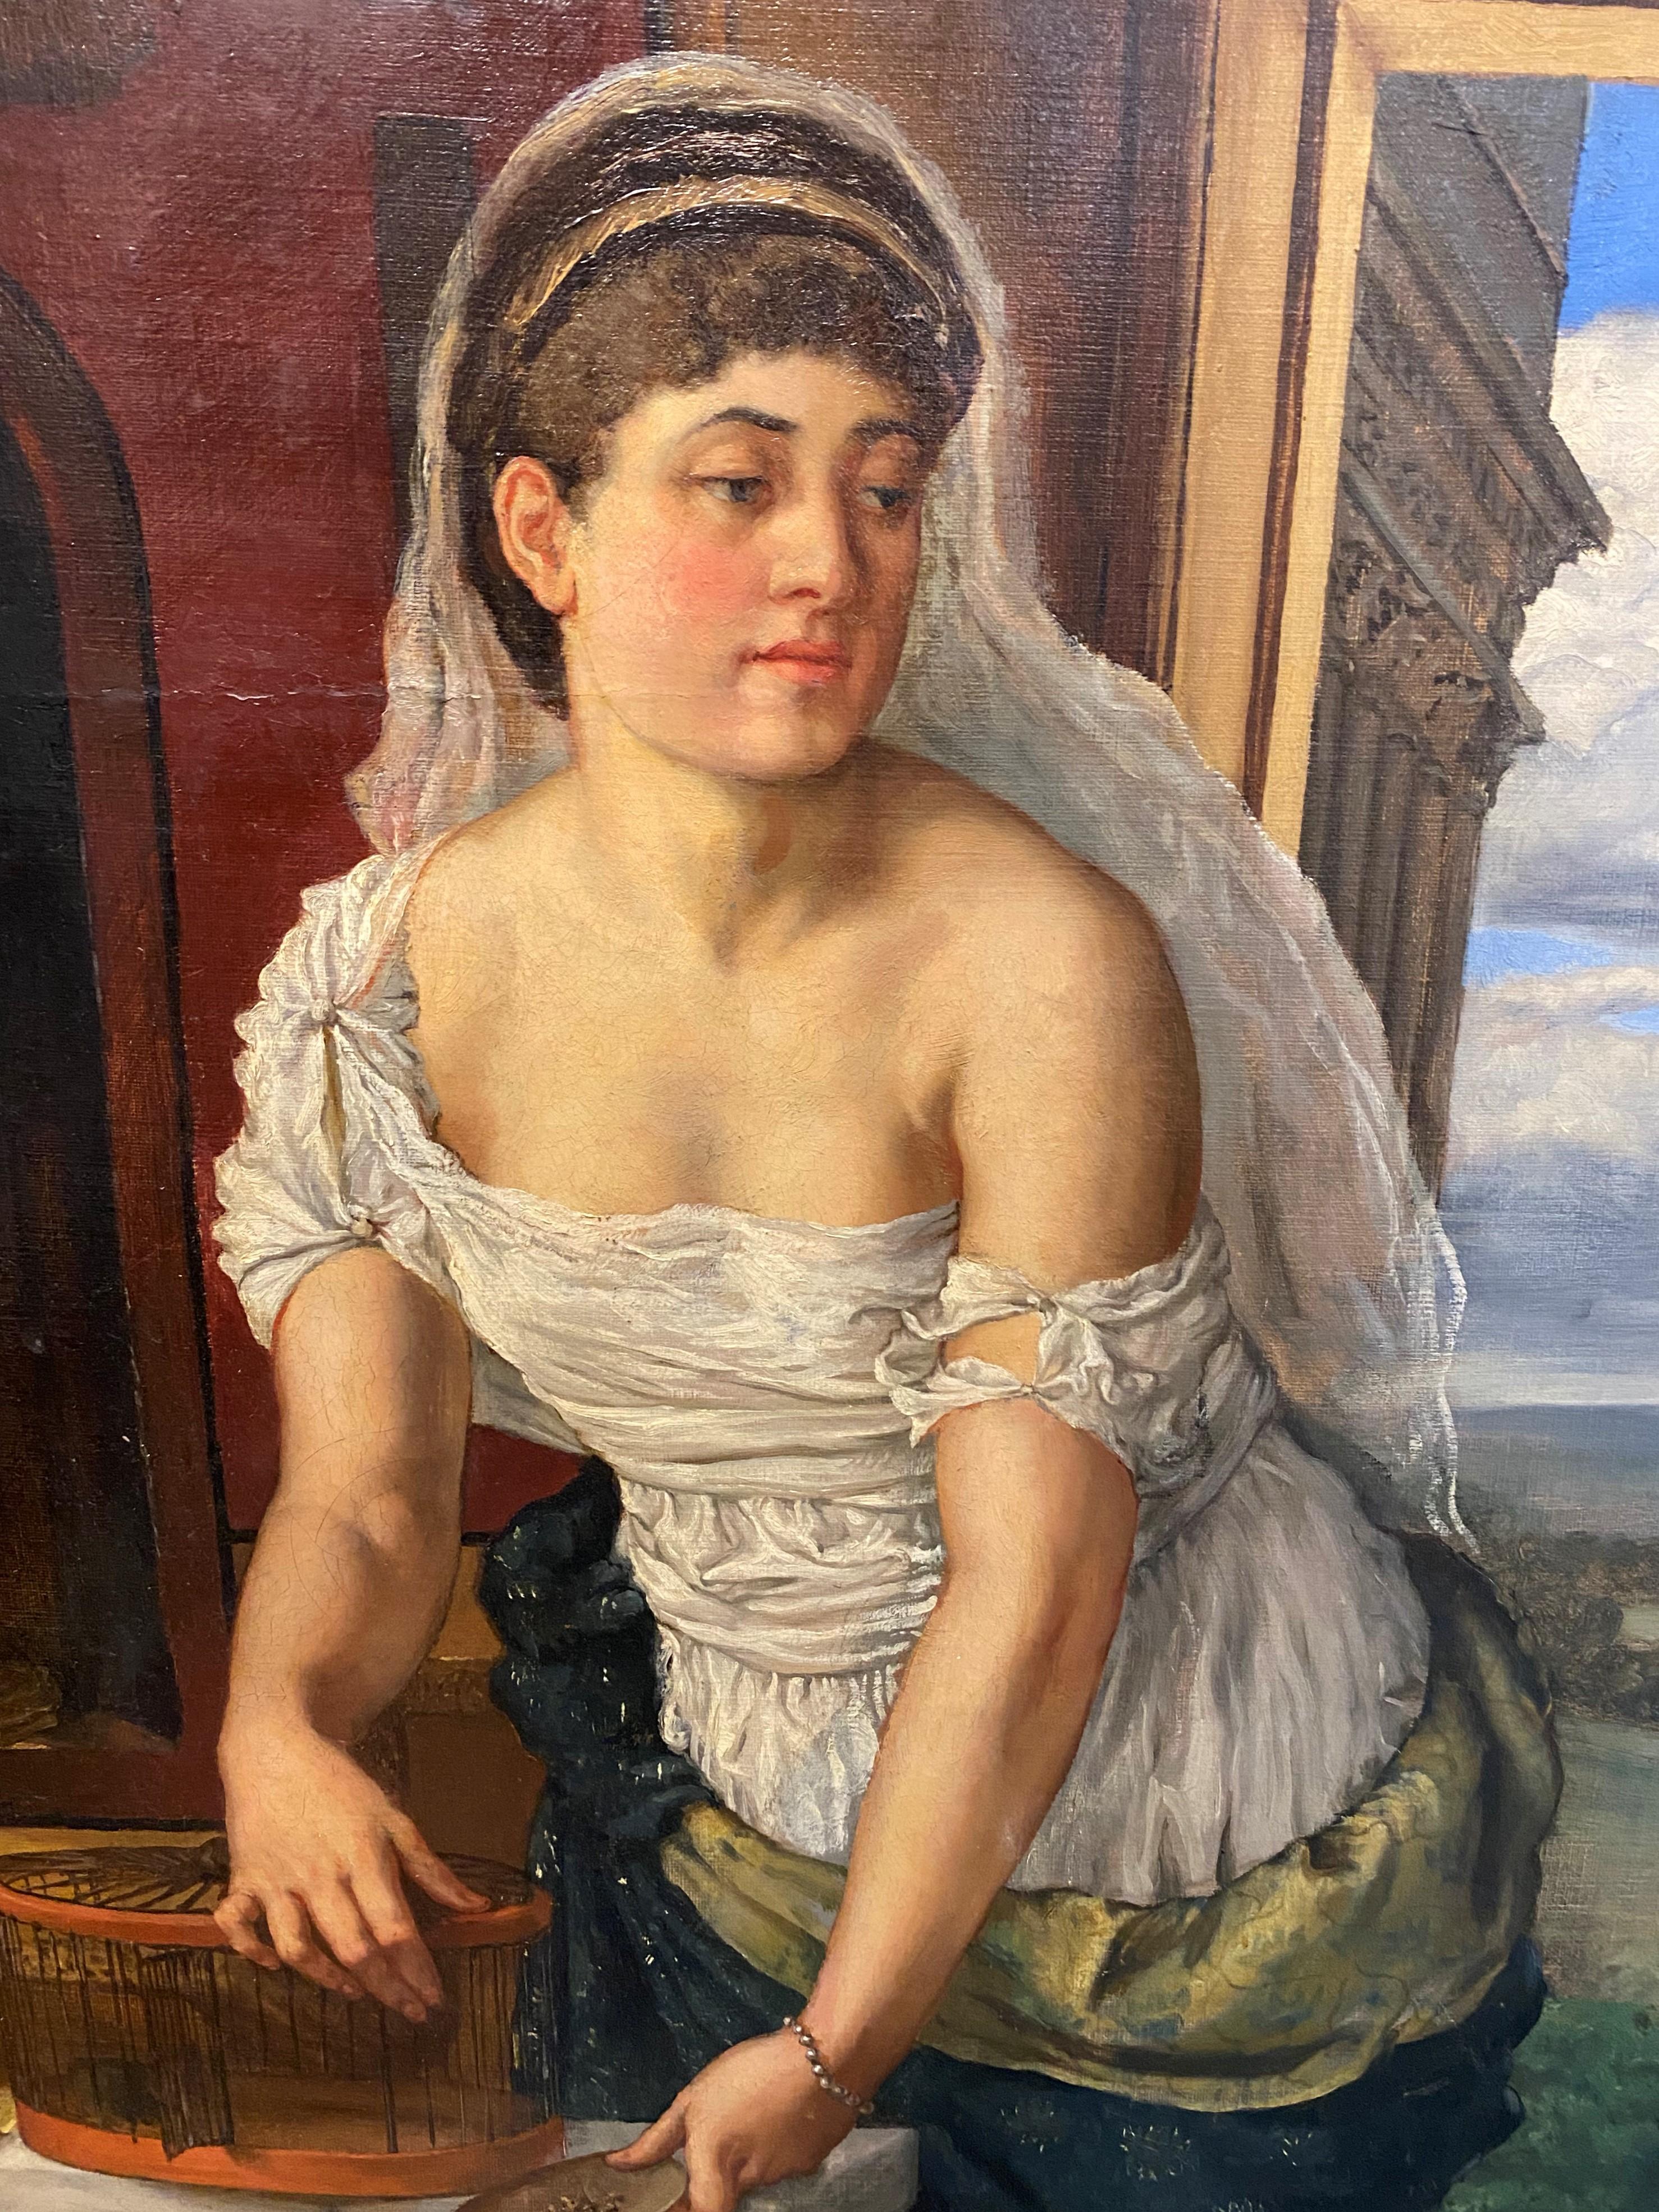 Very large Italian antique oil painting. Beautiful details and realism see all photos. The frame is original and has damage, see all pictures. The canvas has been repaired and the places can be seen from the back side, see photos. The actual